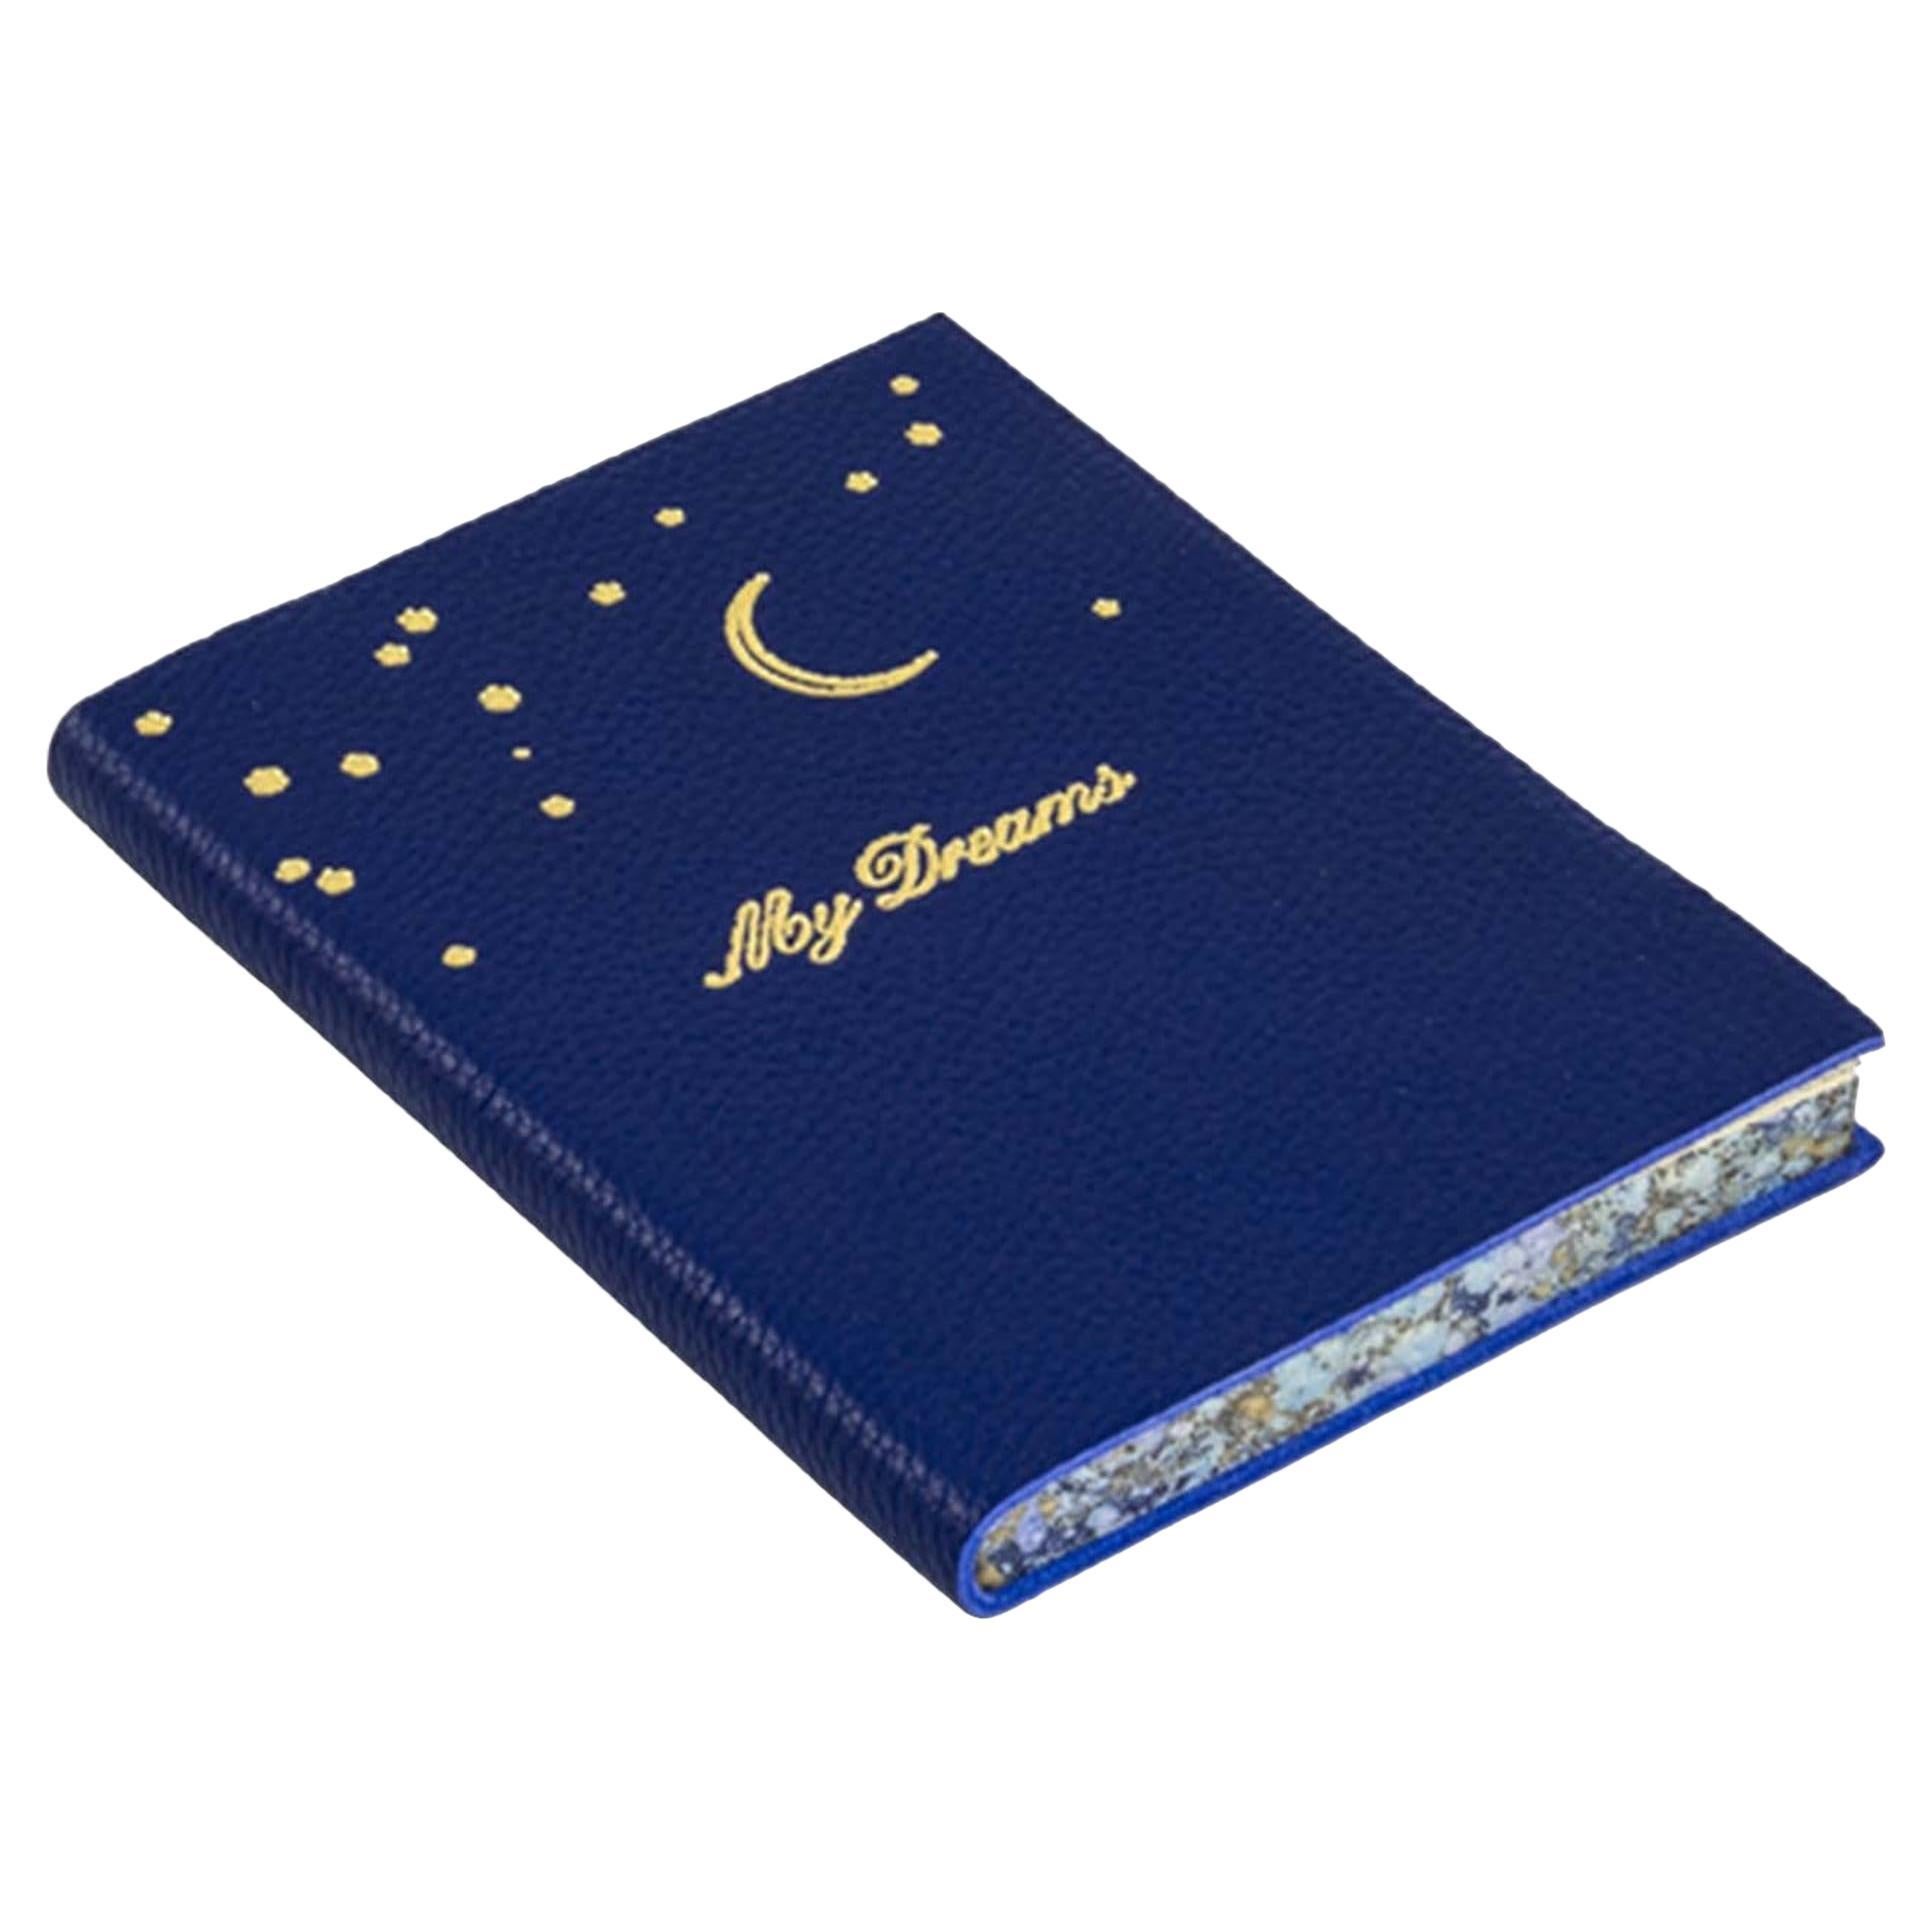 My Dreams Set of 2 Blue Journals For Sale